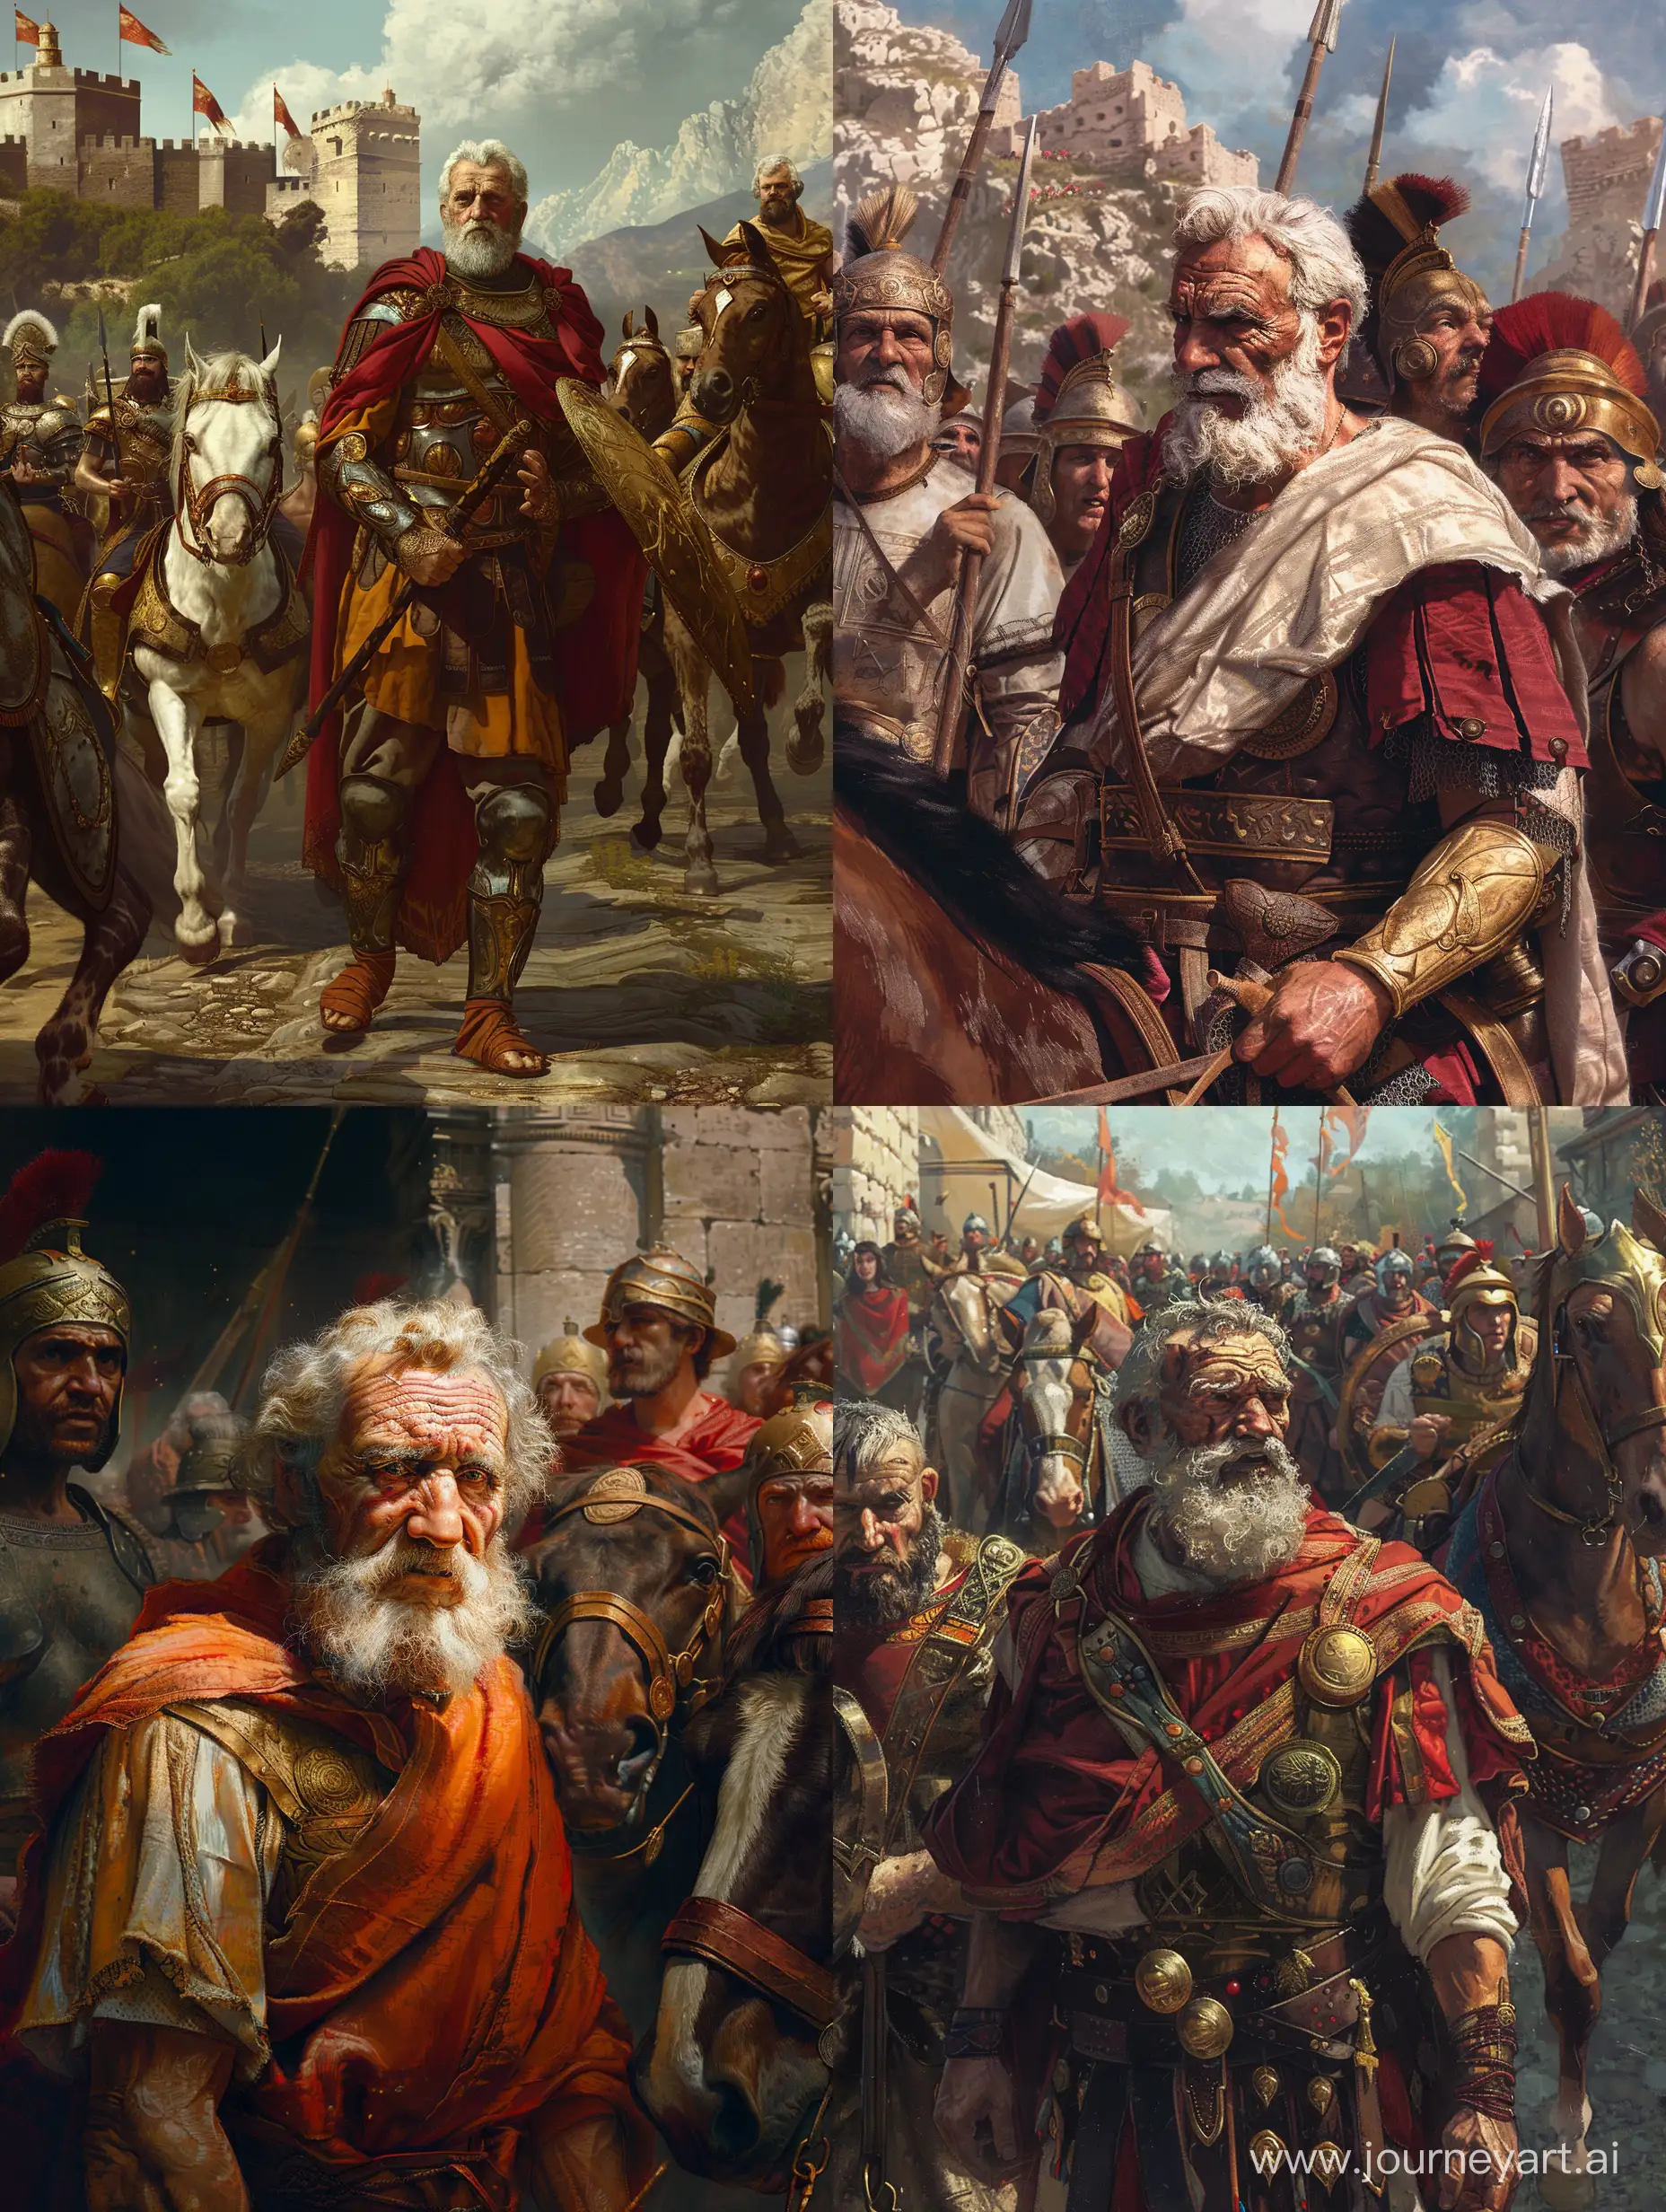 Antigonus-General-of-Alexander-the-Great-Arrives-in-Tralles-with-His-Renaissance-Army